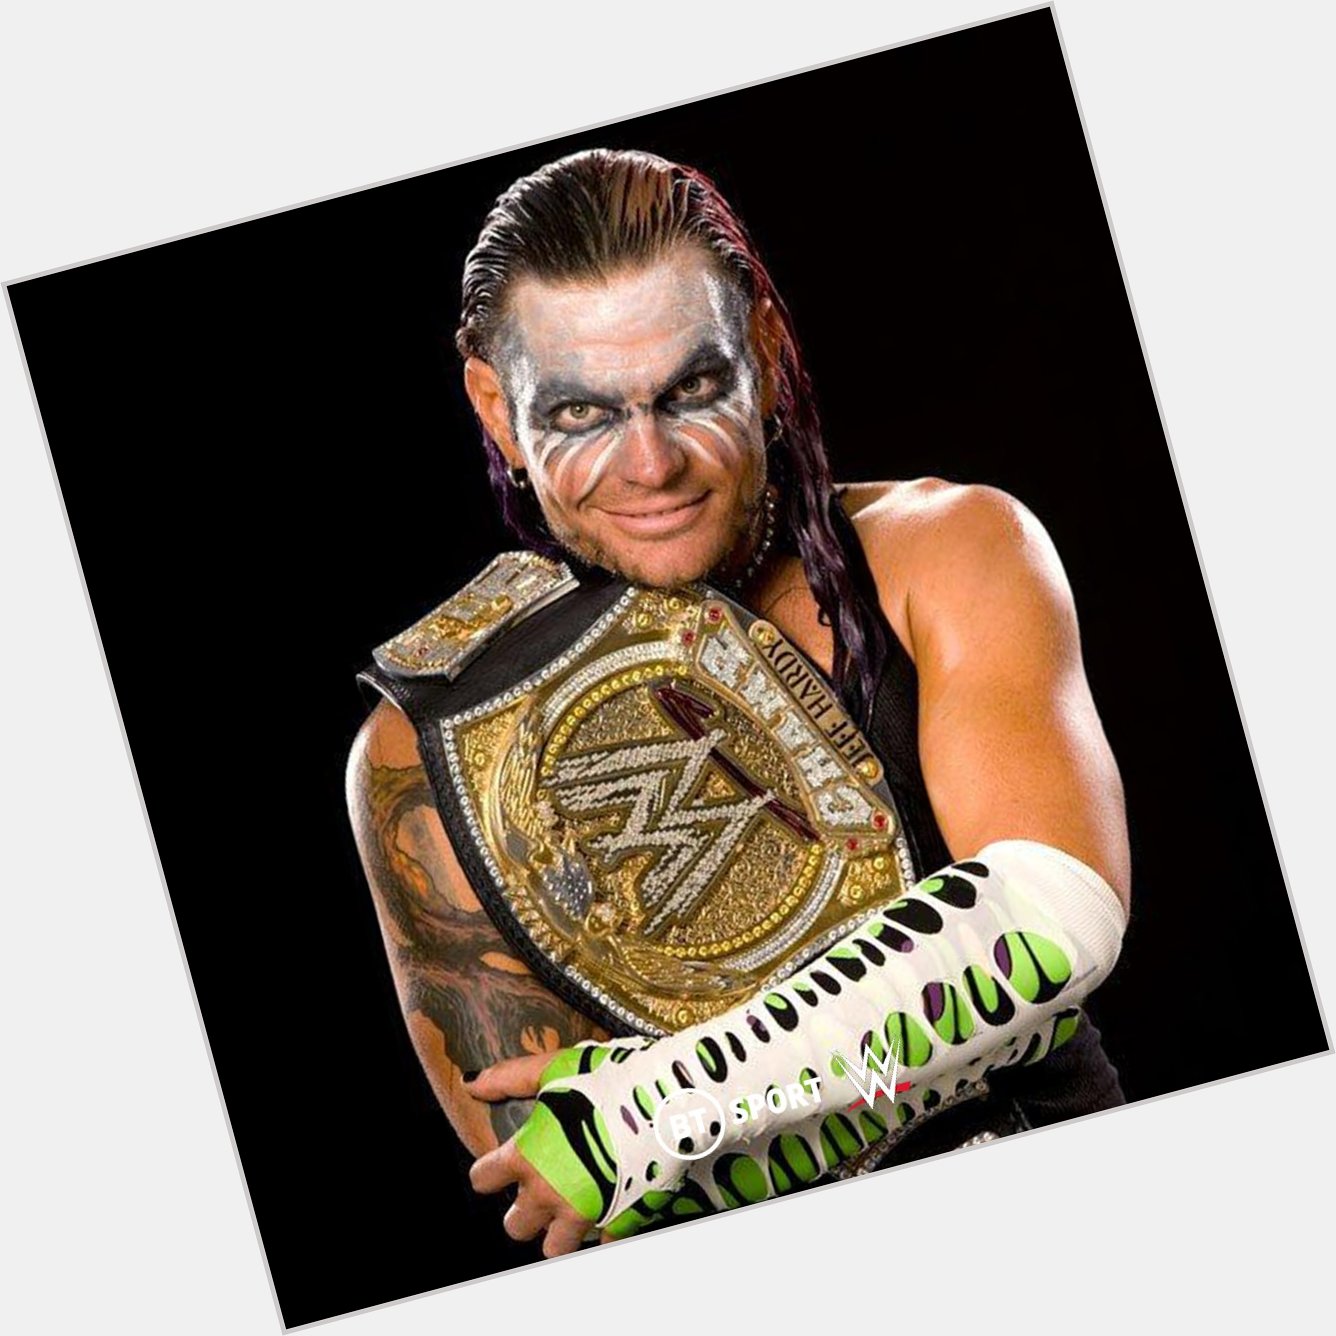 Happy birthday to my favourite wrestler of all time! The Charismatic Enigma Jeff Hardy! 